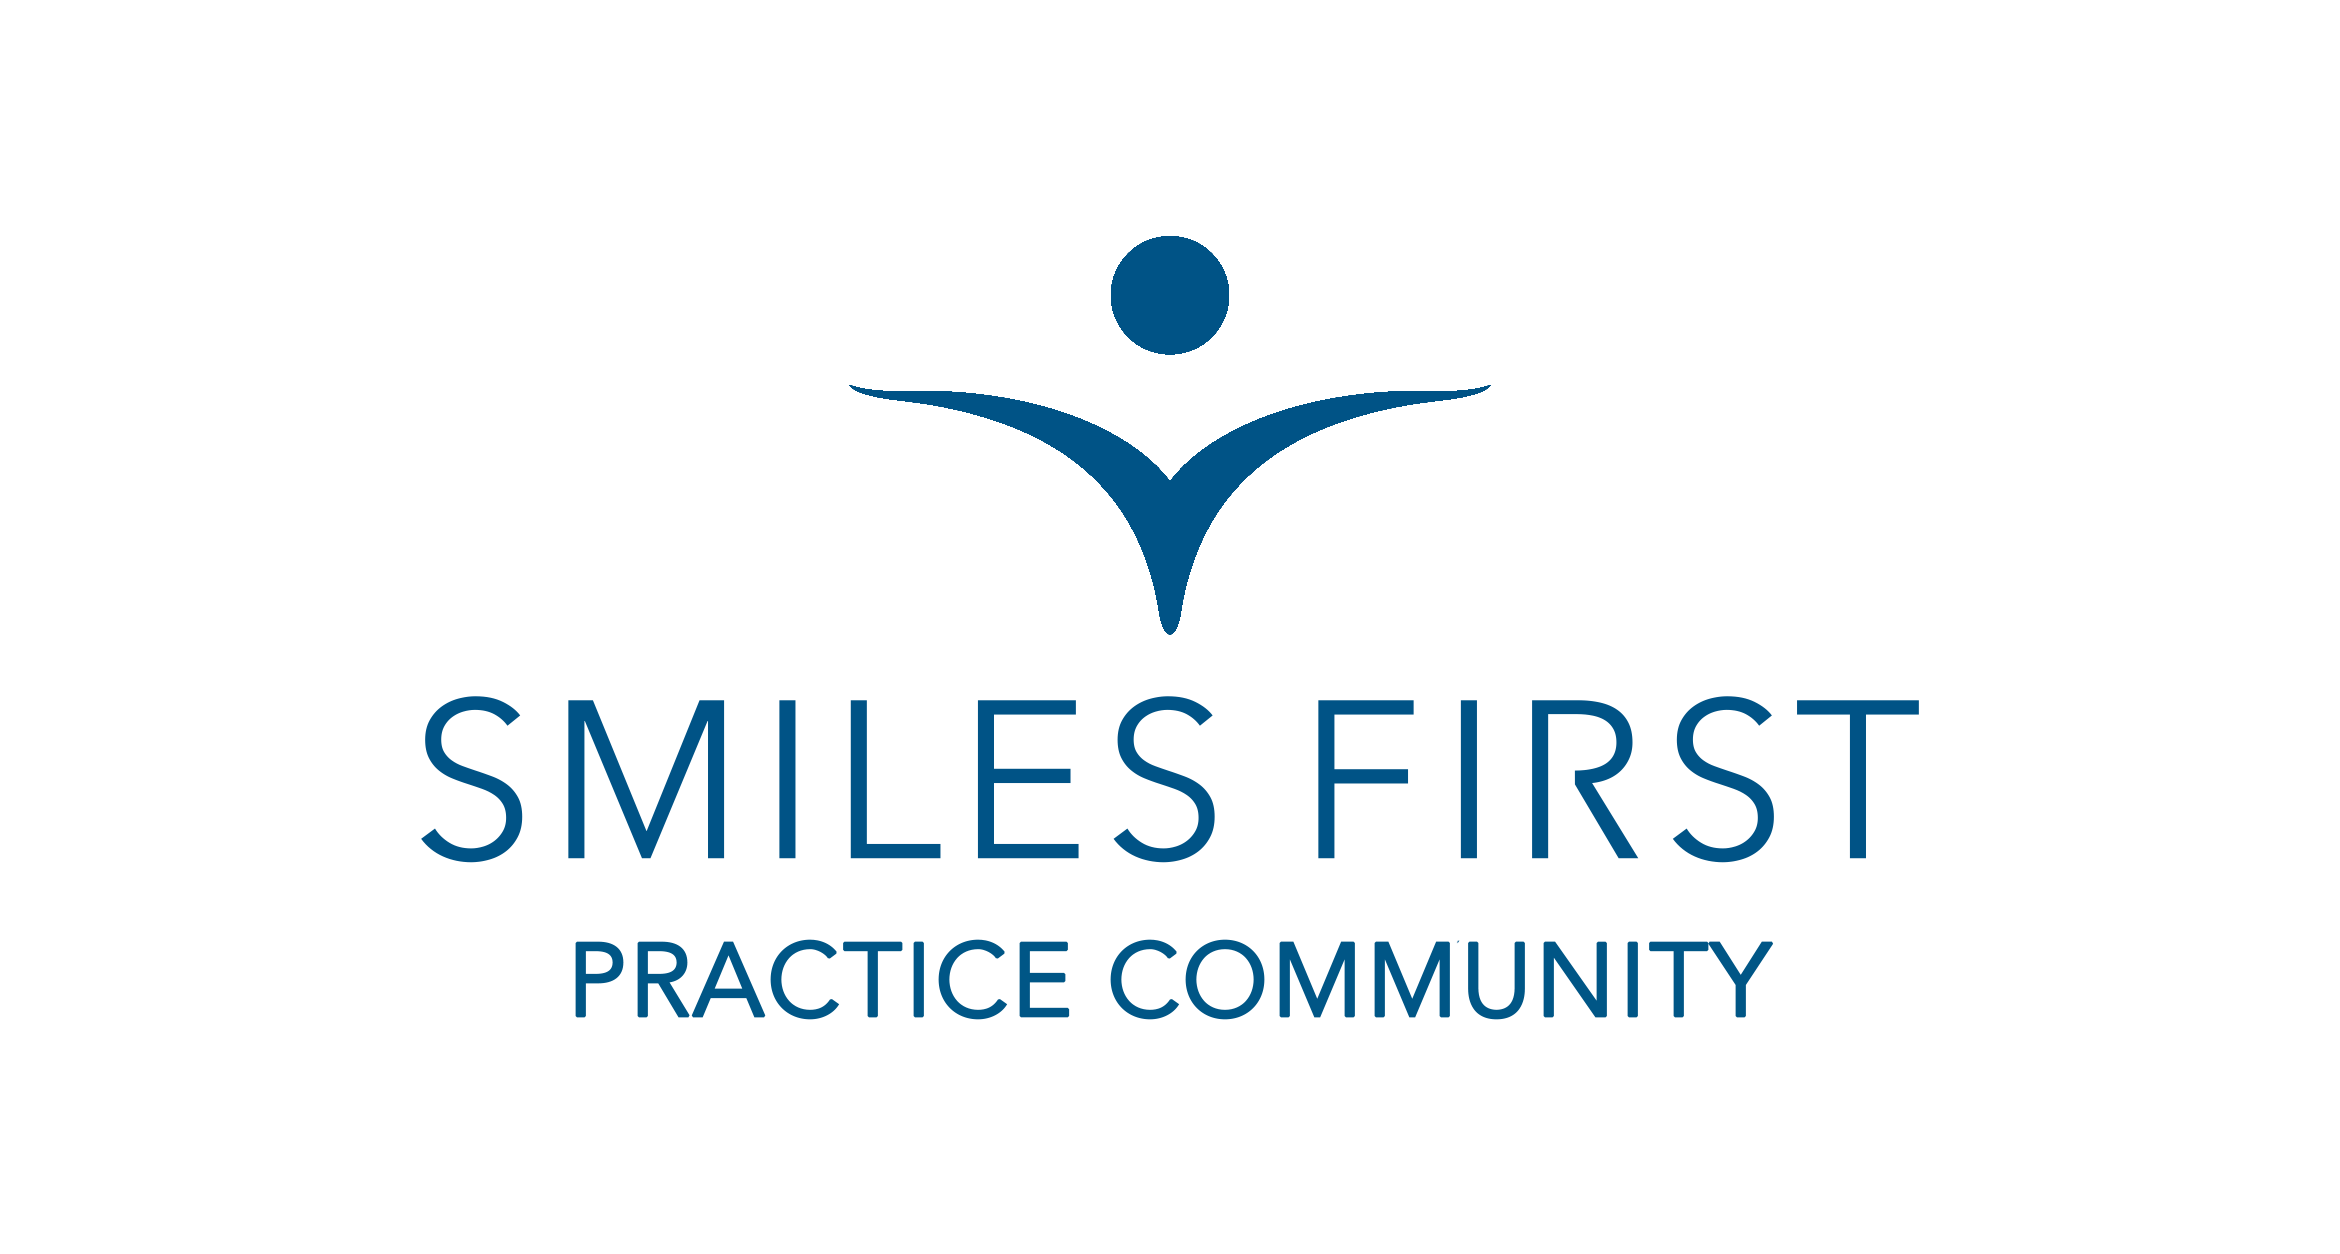 Smiles First Practice Community